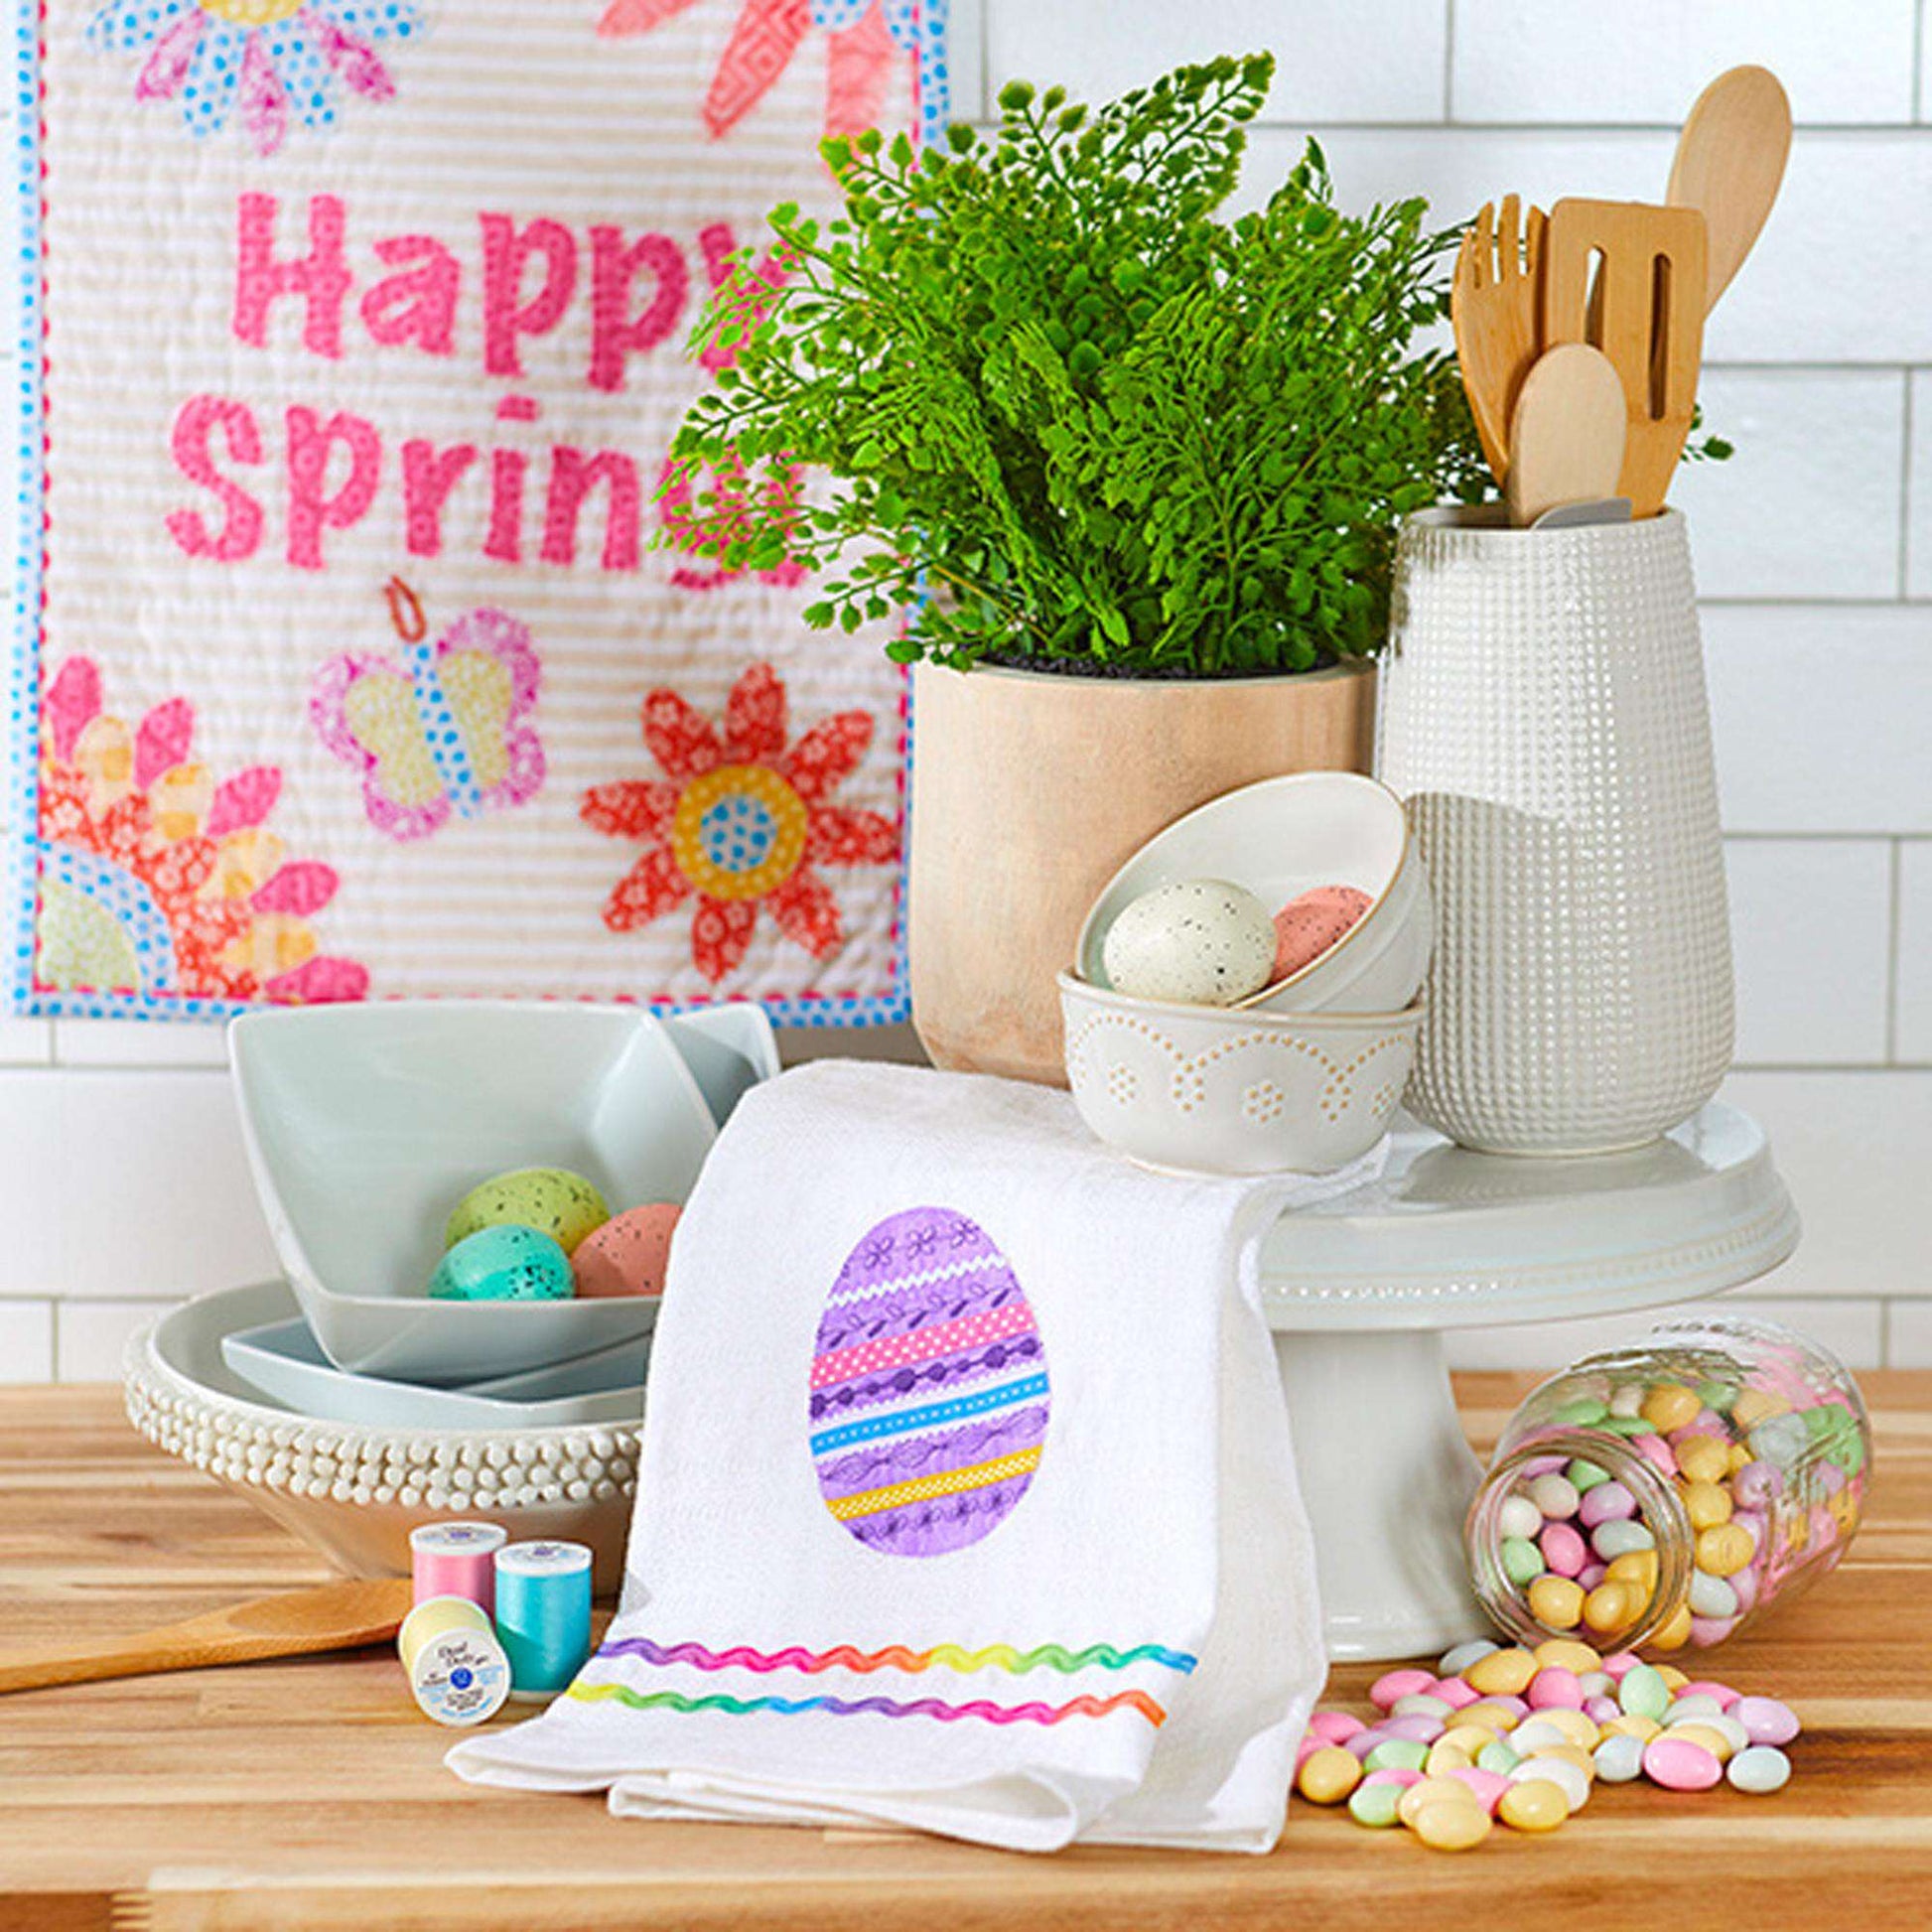 Free Coats & Clark Sewing Easter Egg Dish Towel Pattern